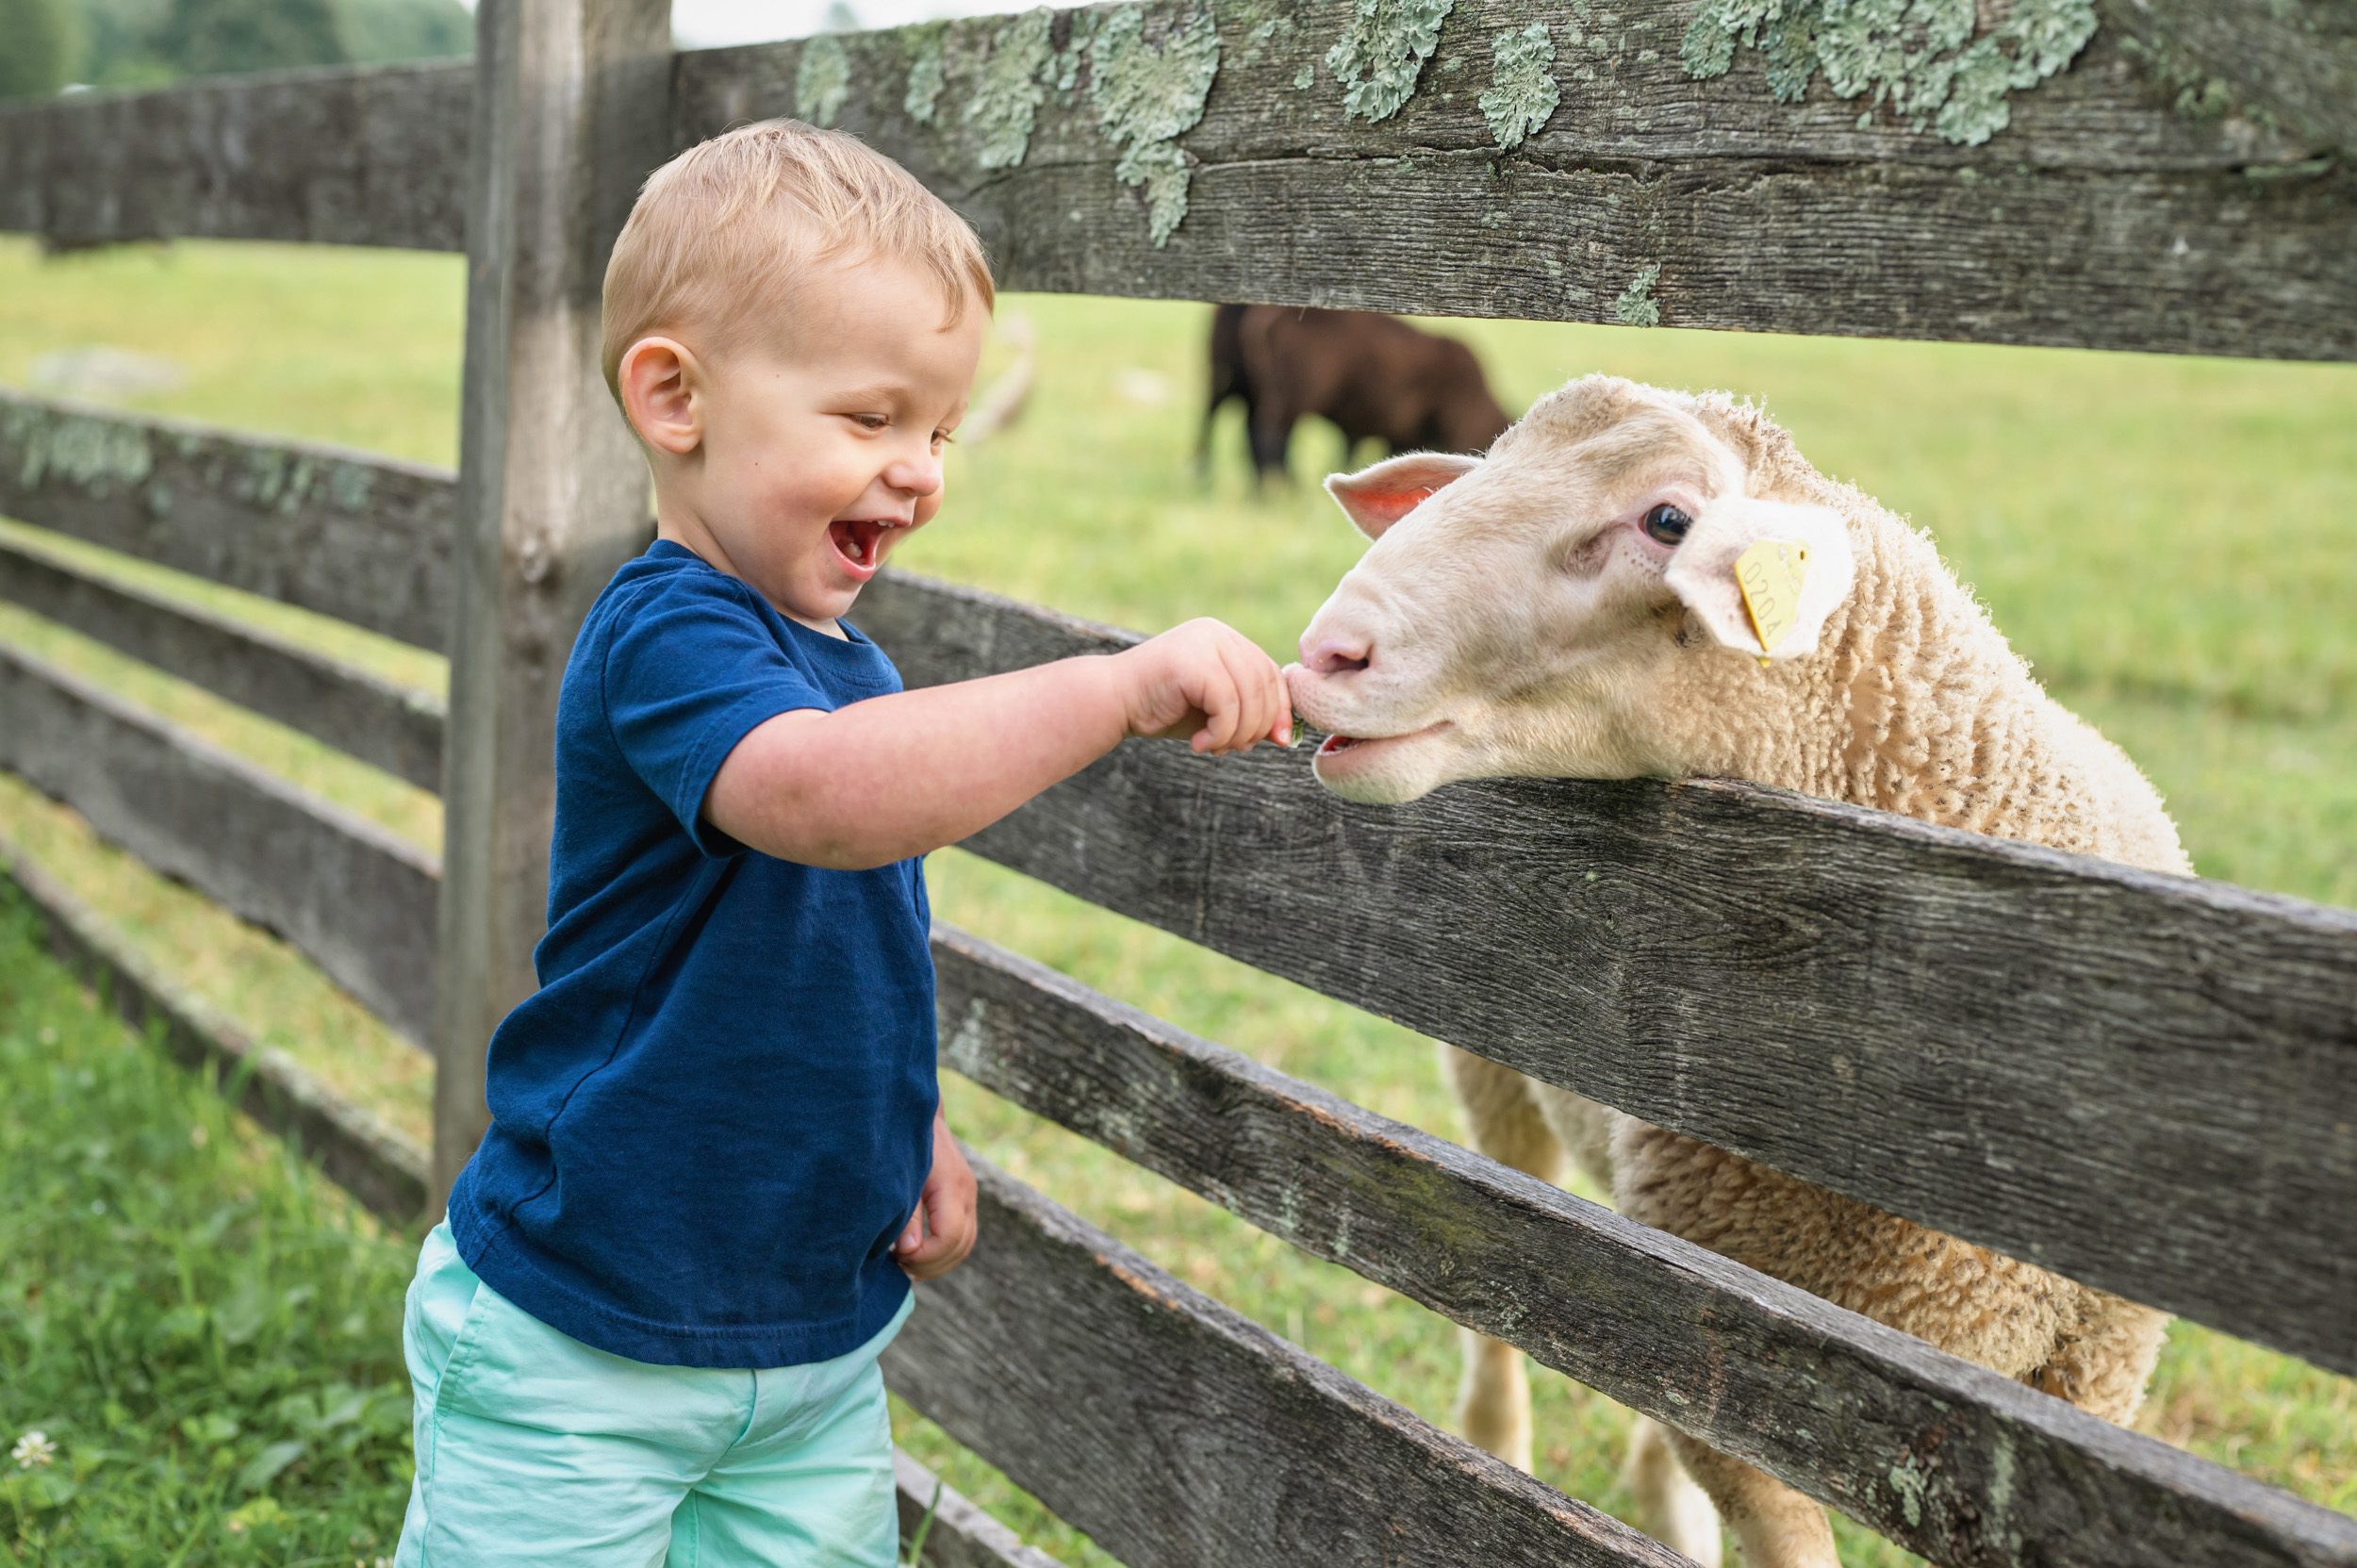 a little boy smiling as a sheep pokes its head through the fence and eats a piece of grass out of his hand during a spring photos session